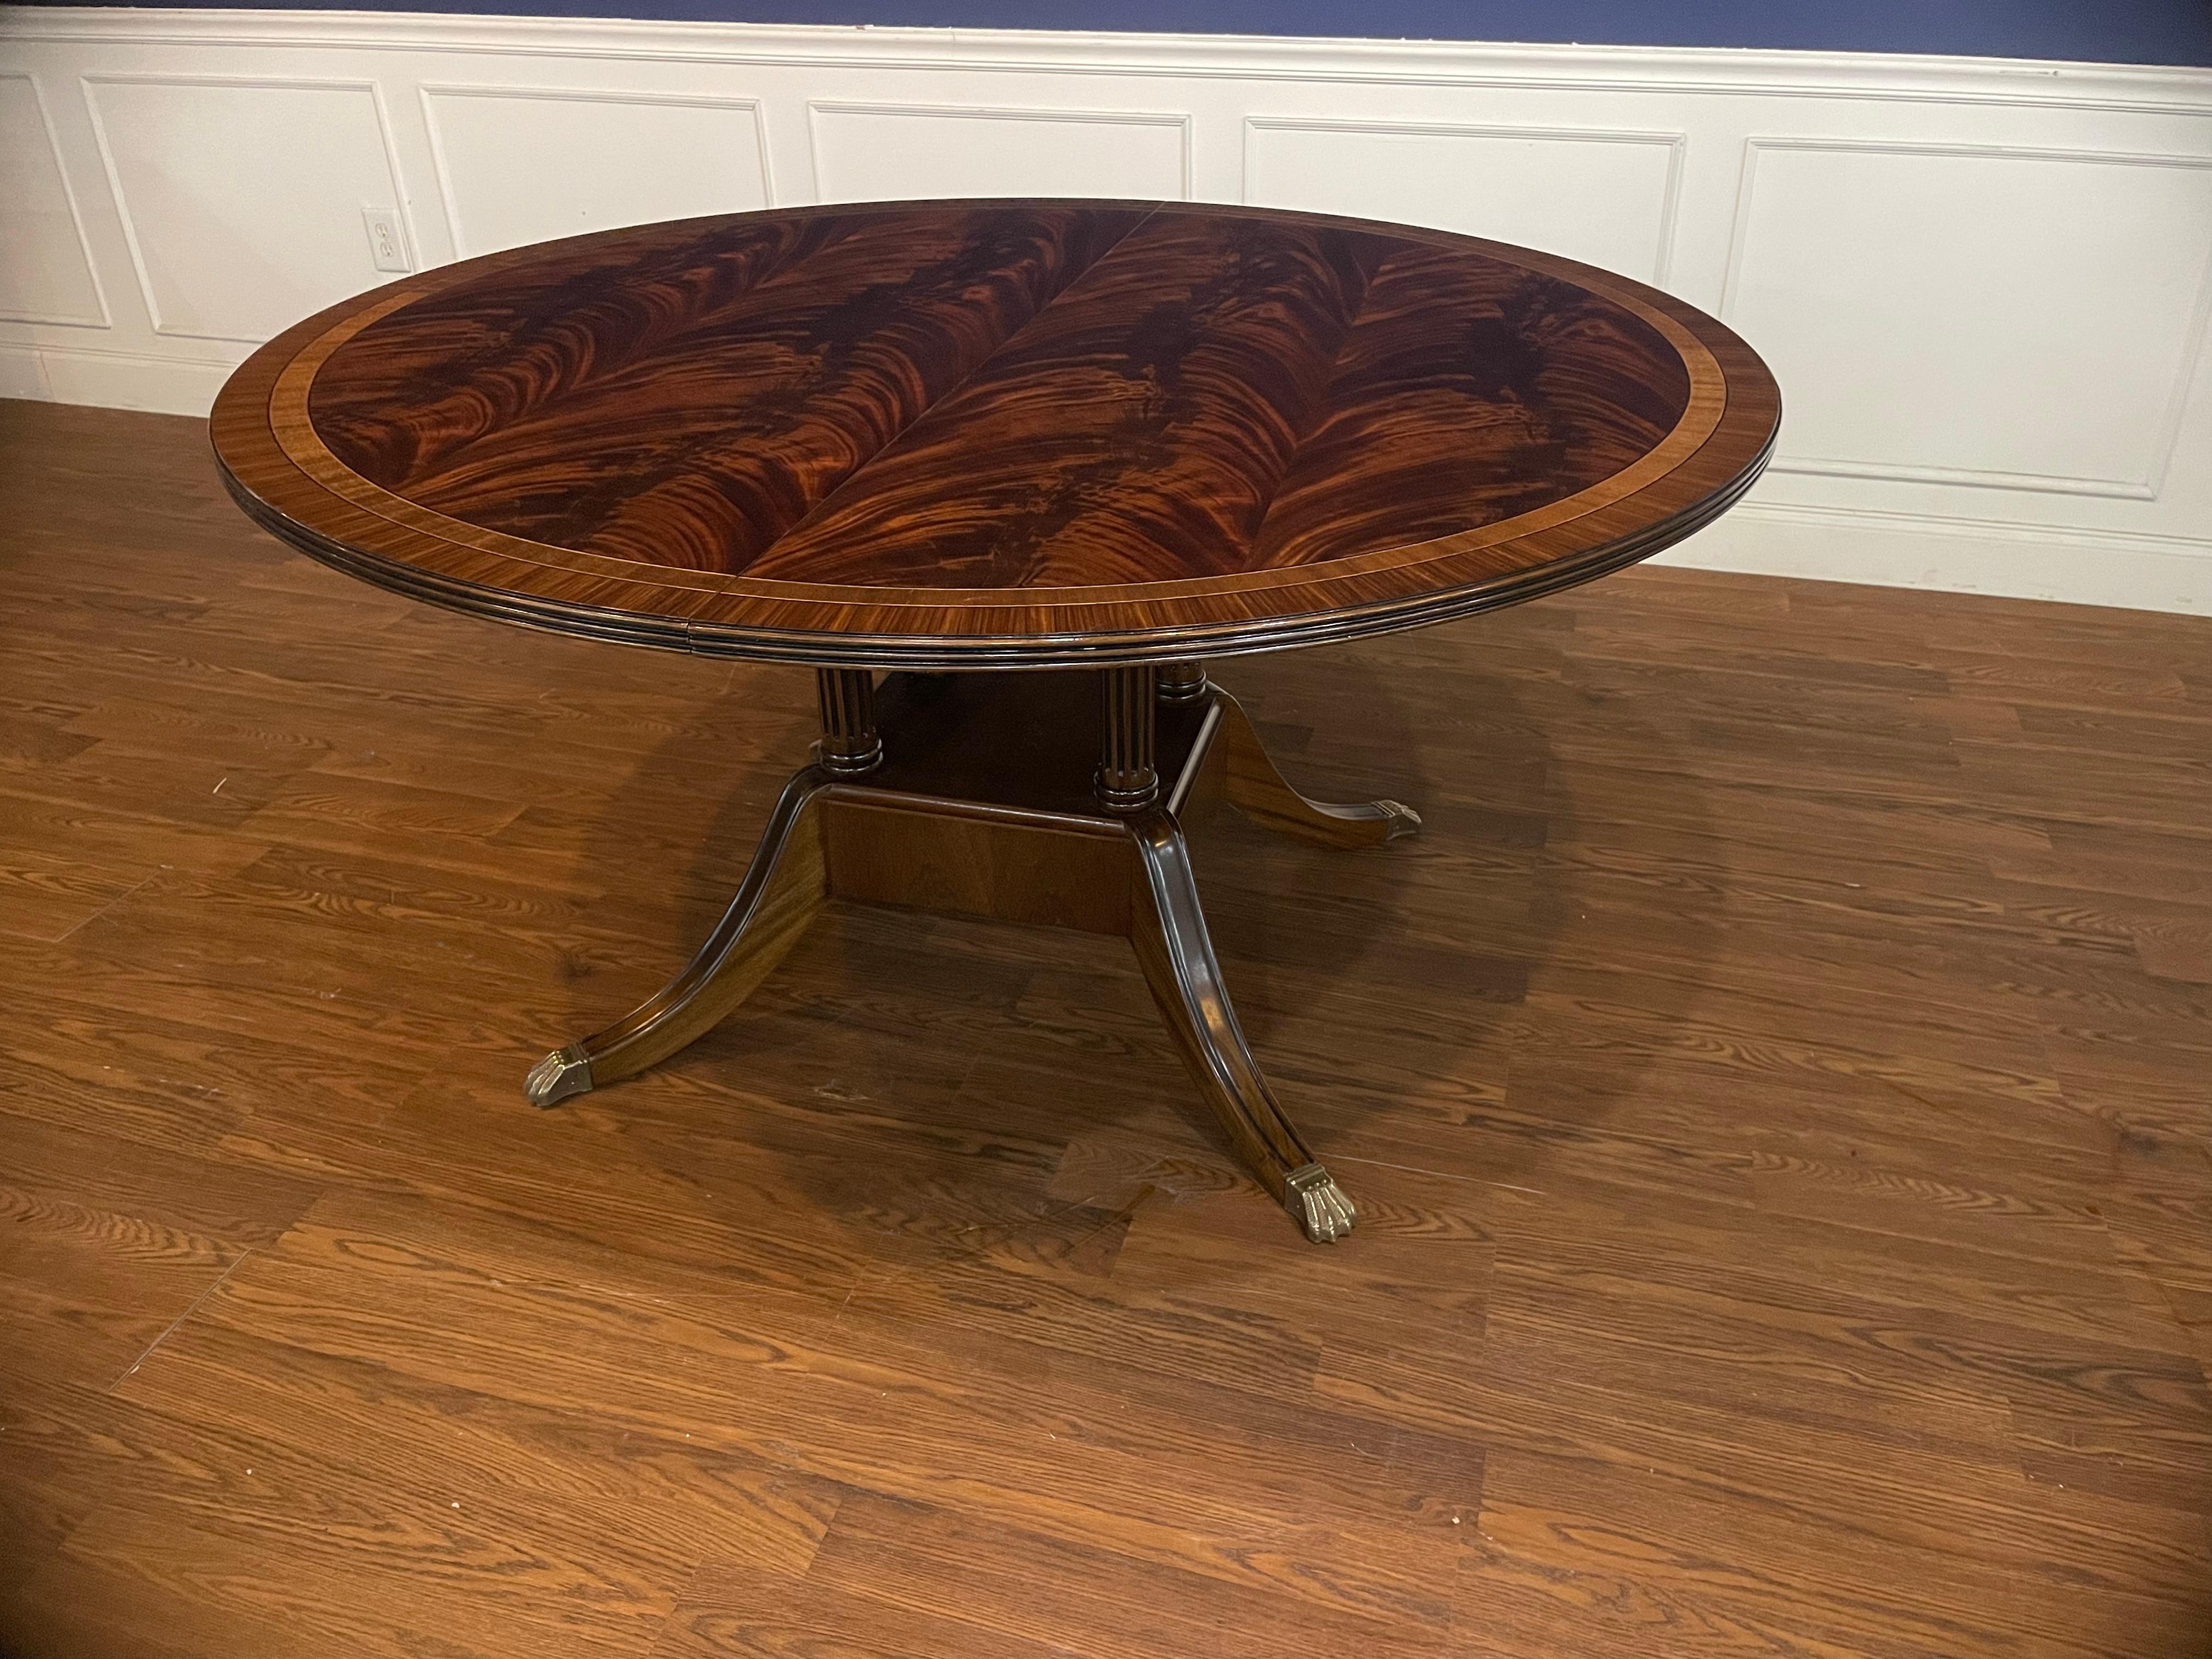 This is made-to-order round traditional mahogany dining table made in the Leighton Hall shop. It features field of west African swirly crotch mahogany and borders of straight grain mahogany and santos rosewood. There are inlays of ebony and white